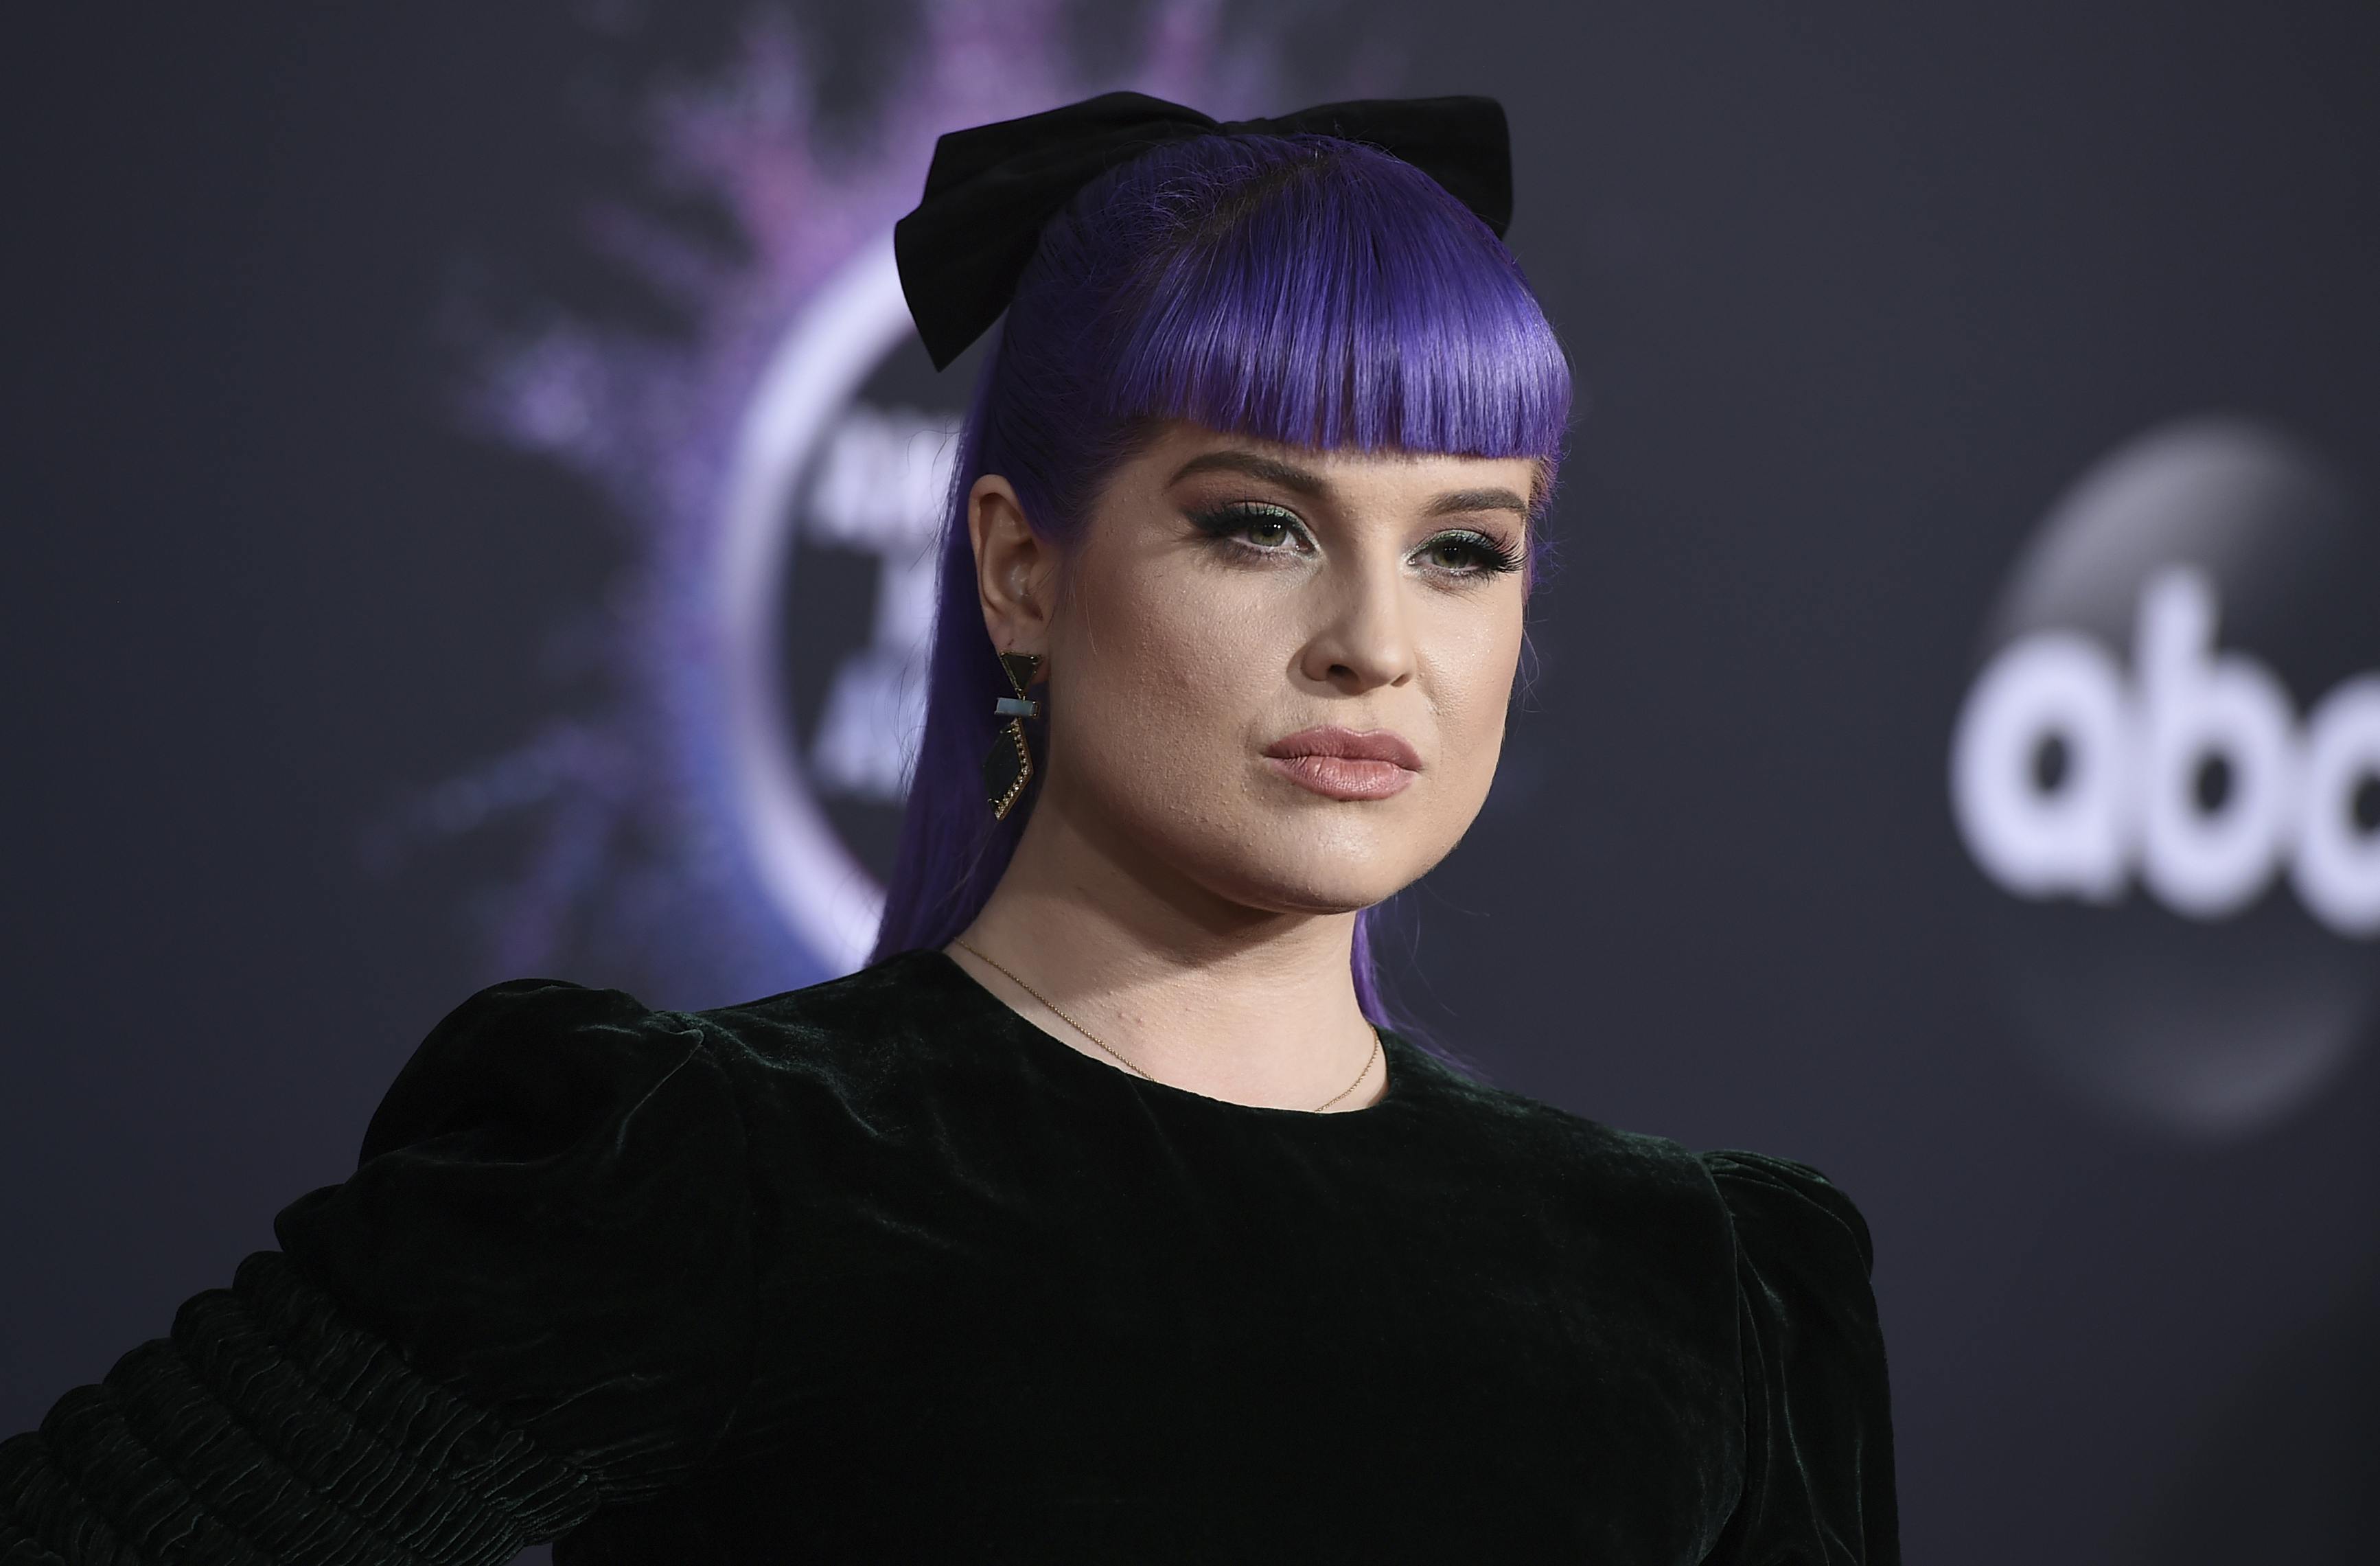 Kelly Osbourne arrives at the American Music Awards on Sunday, Nov. 24, 2019, at the Microsoft Theater in Los Angeles. (Photo by Jordan Strauss/Invision/AP)